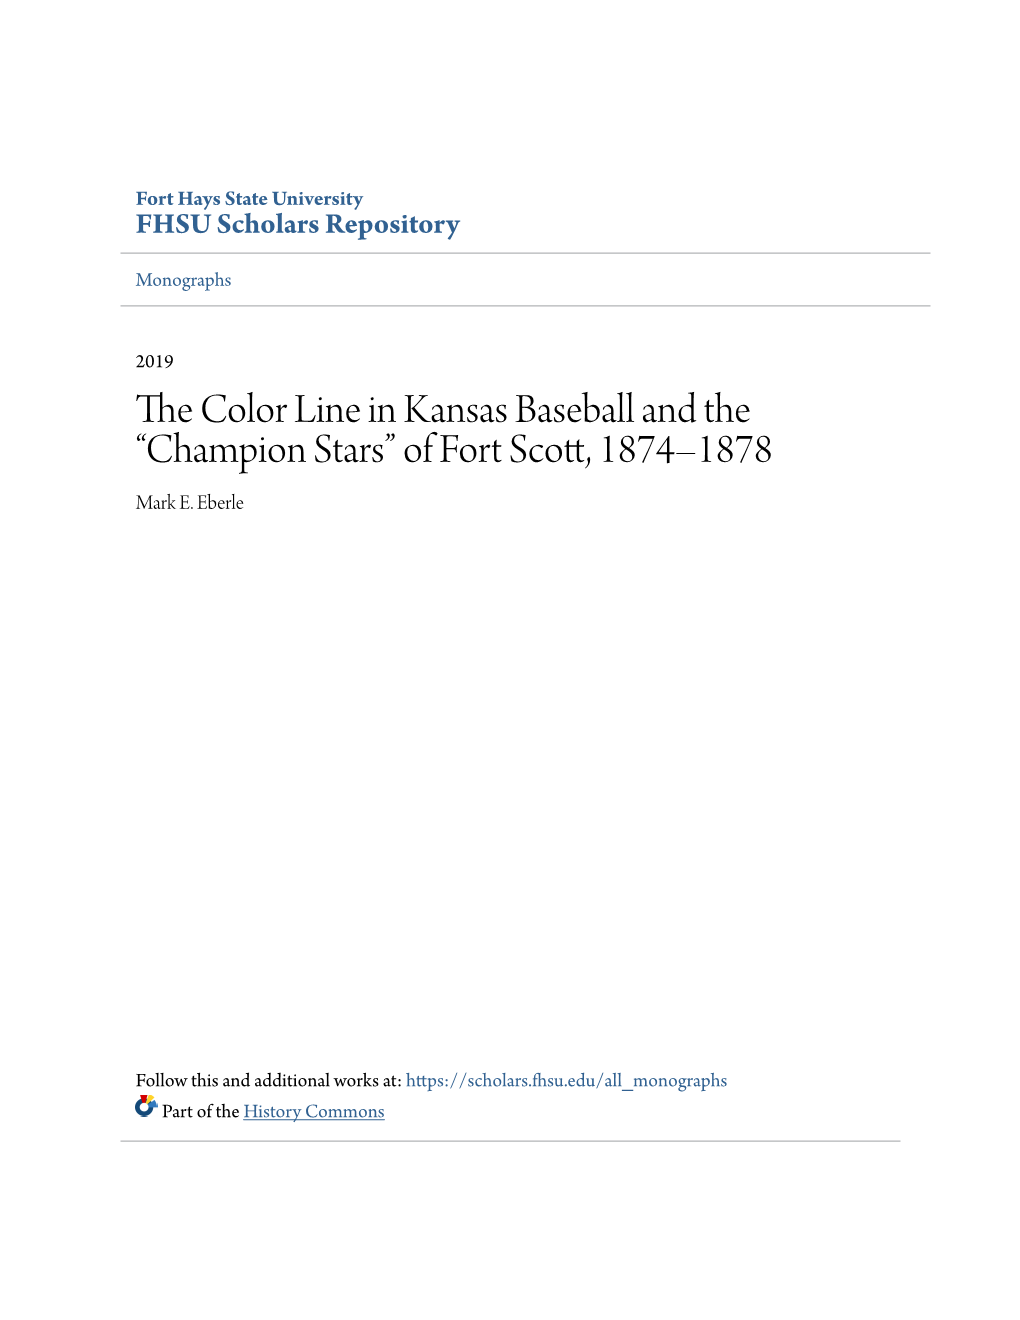 The Color Line in Kansas Baseball and the “Champion Stars” of Fort Scott, 1874–1878